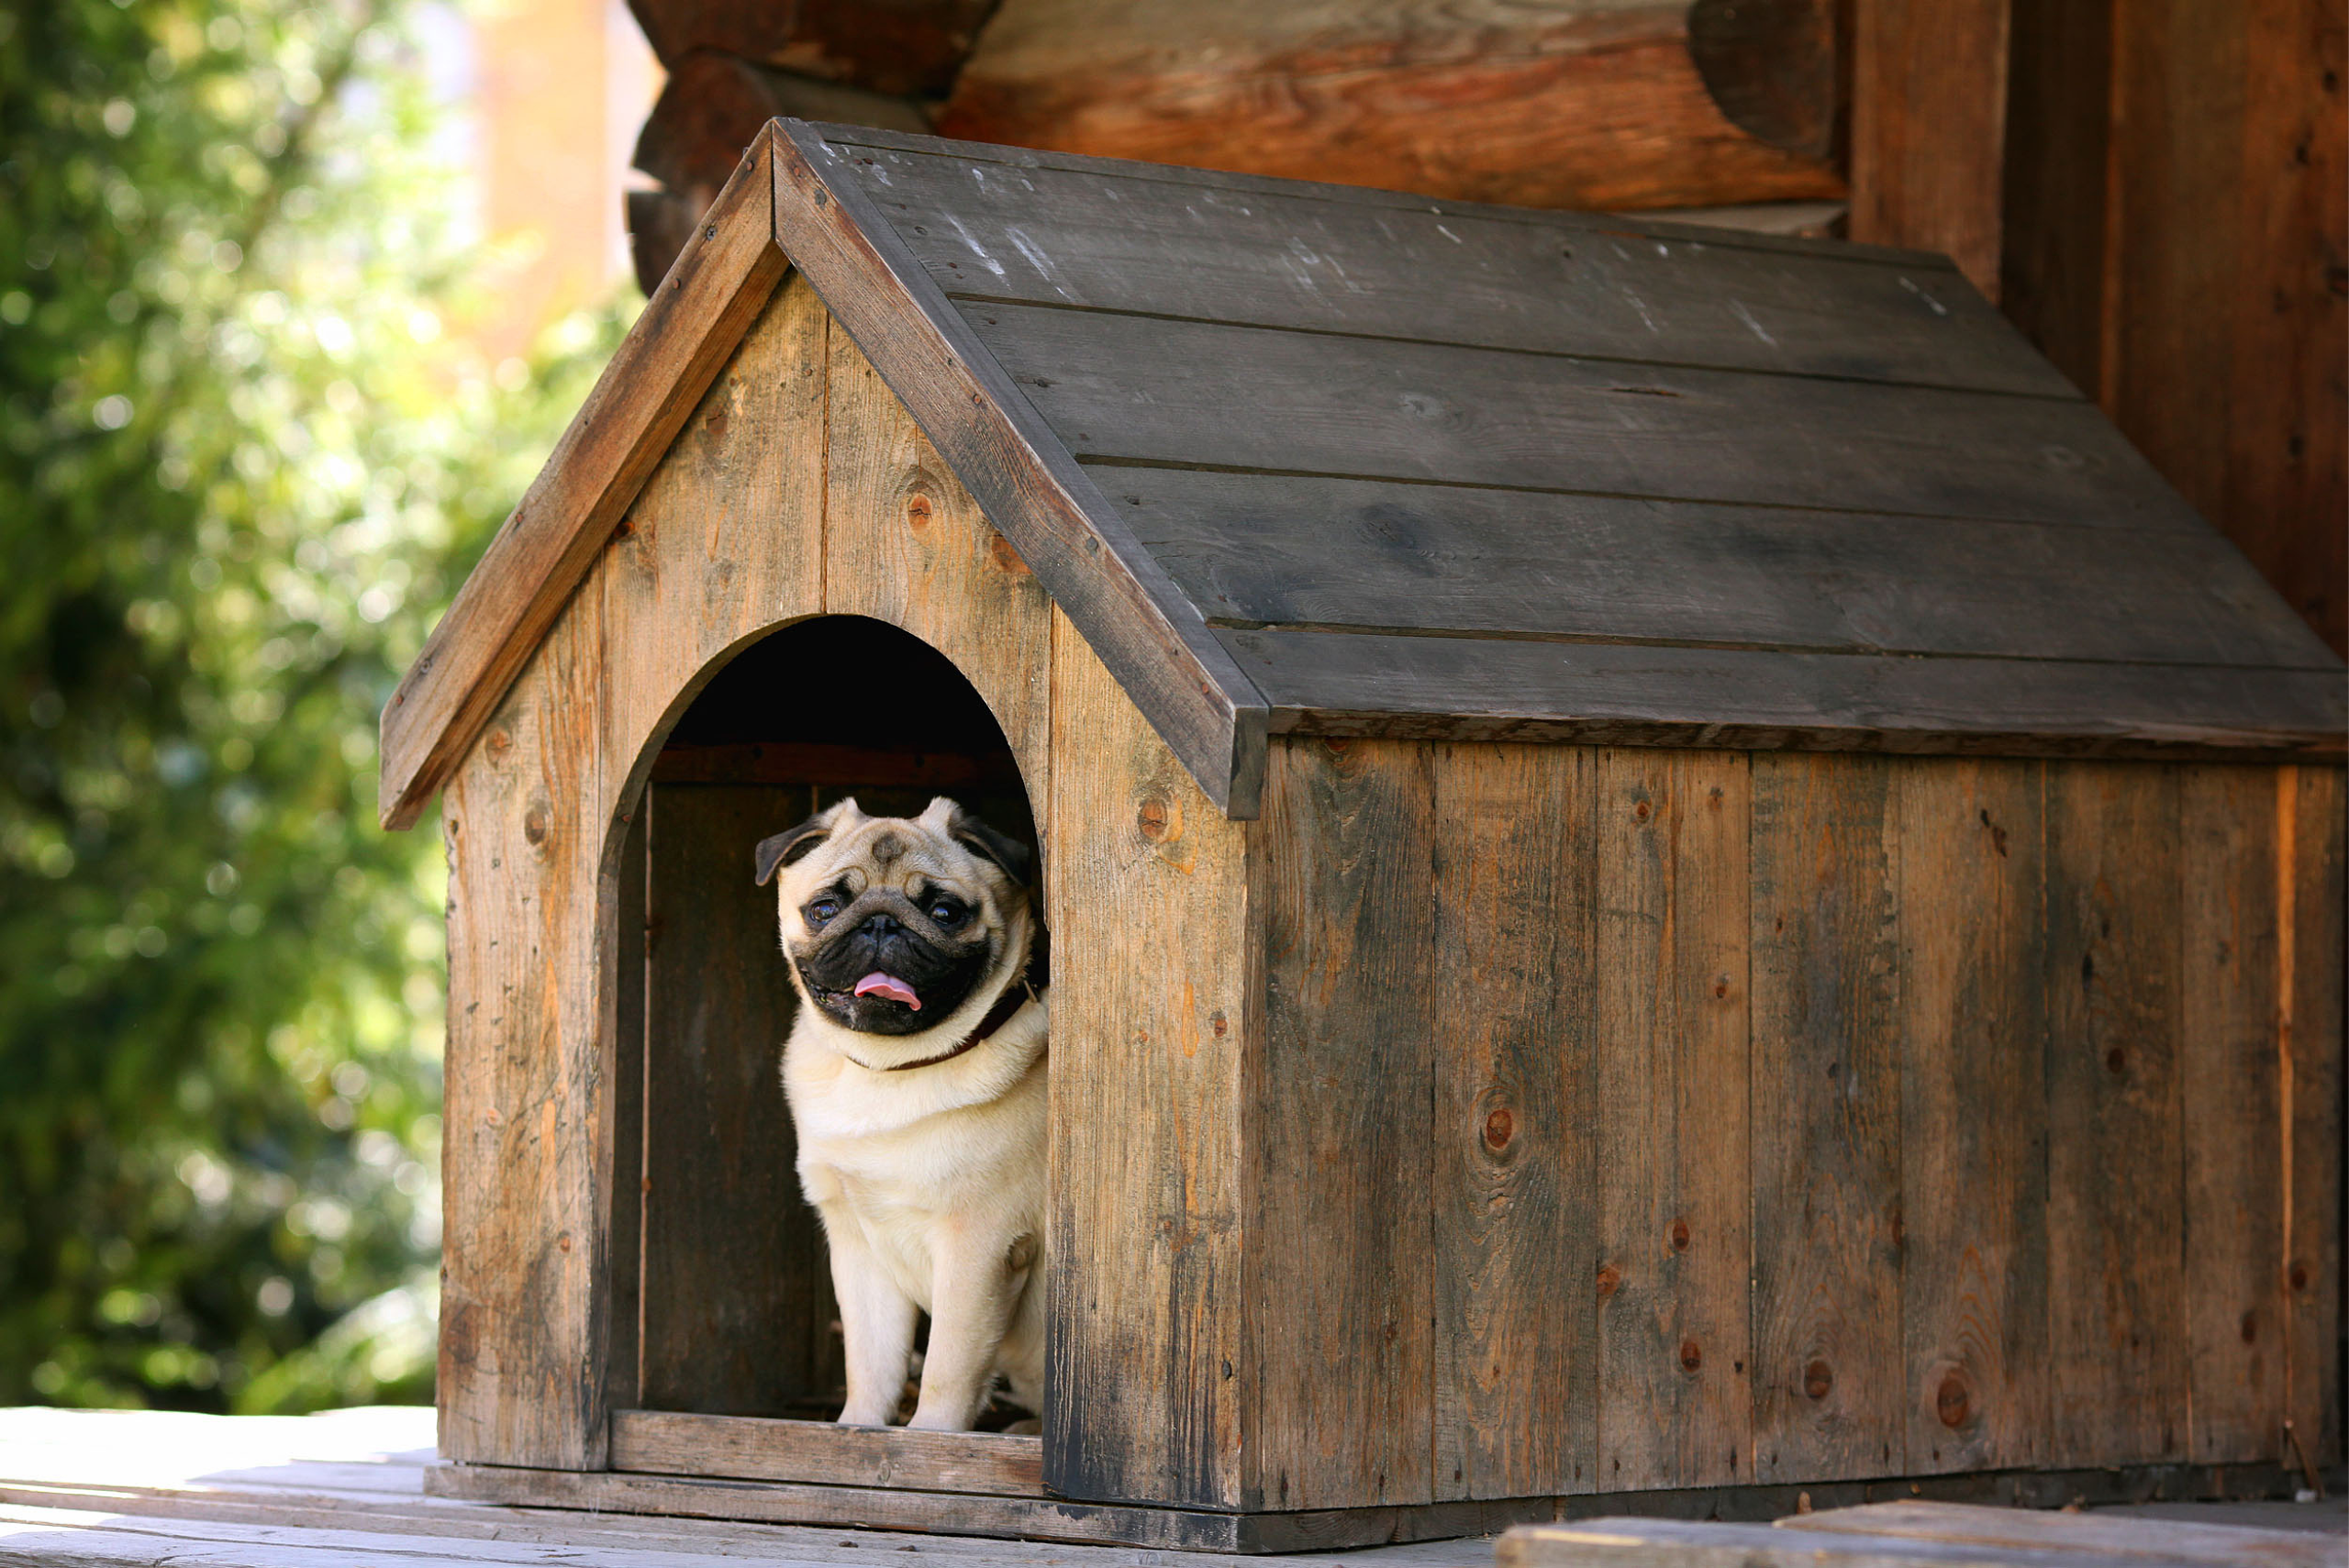 Dog inside a dog house made of wood and has a roof.